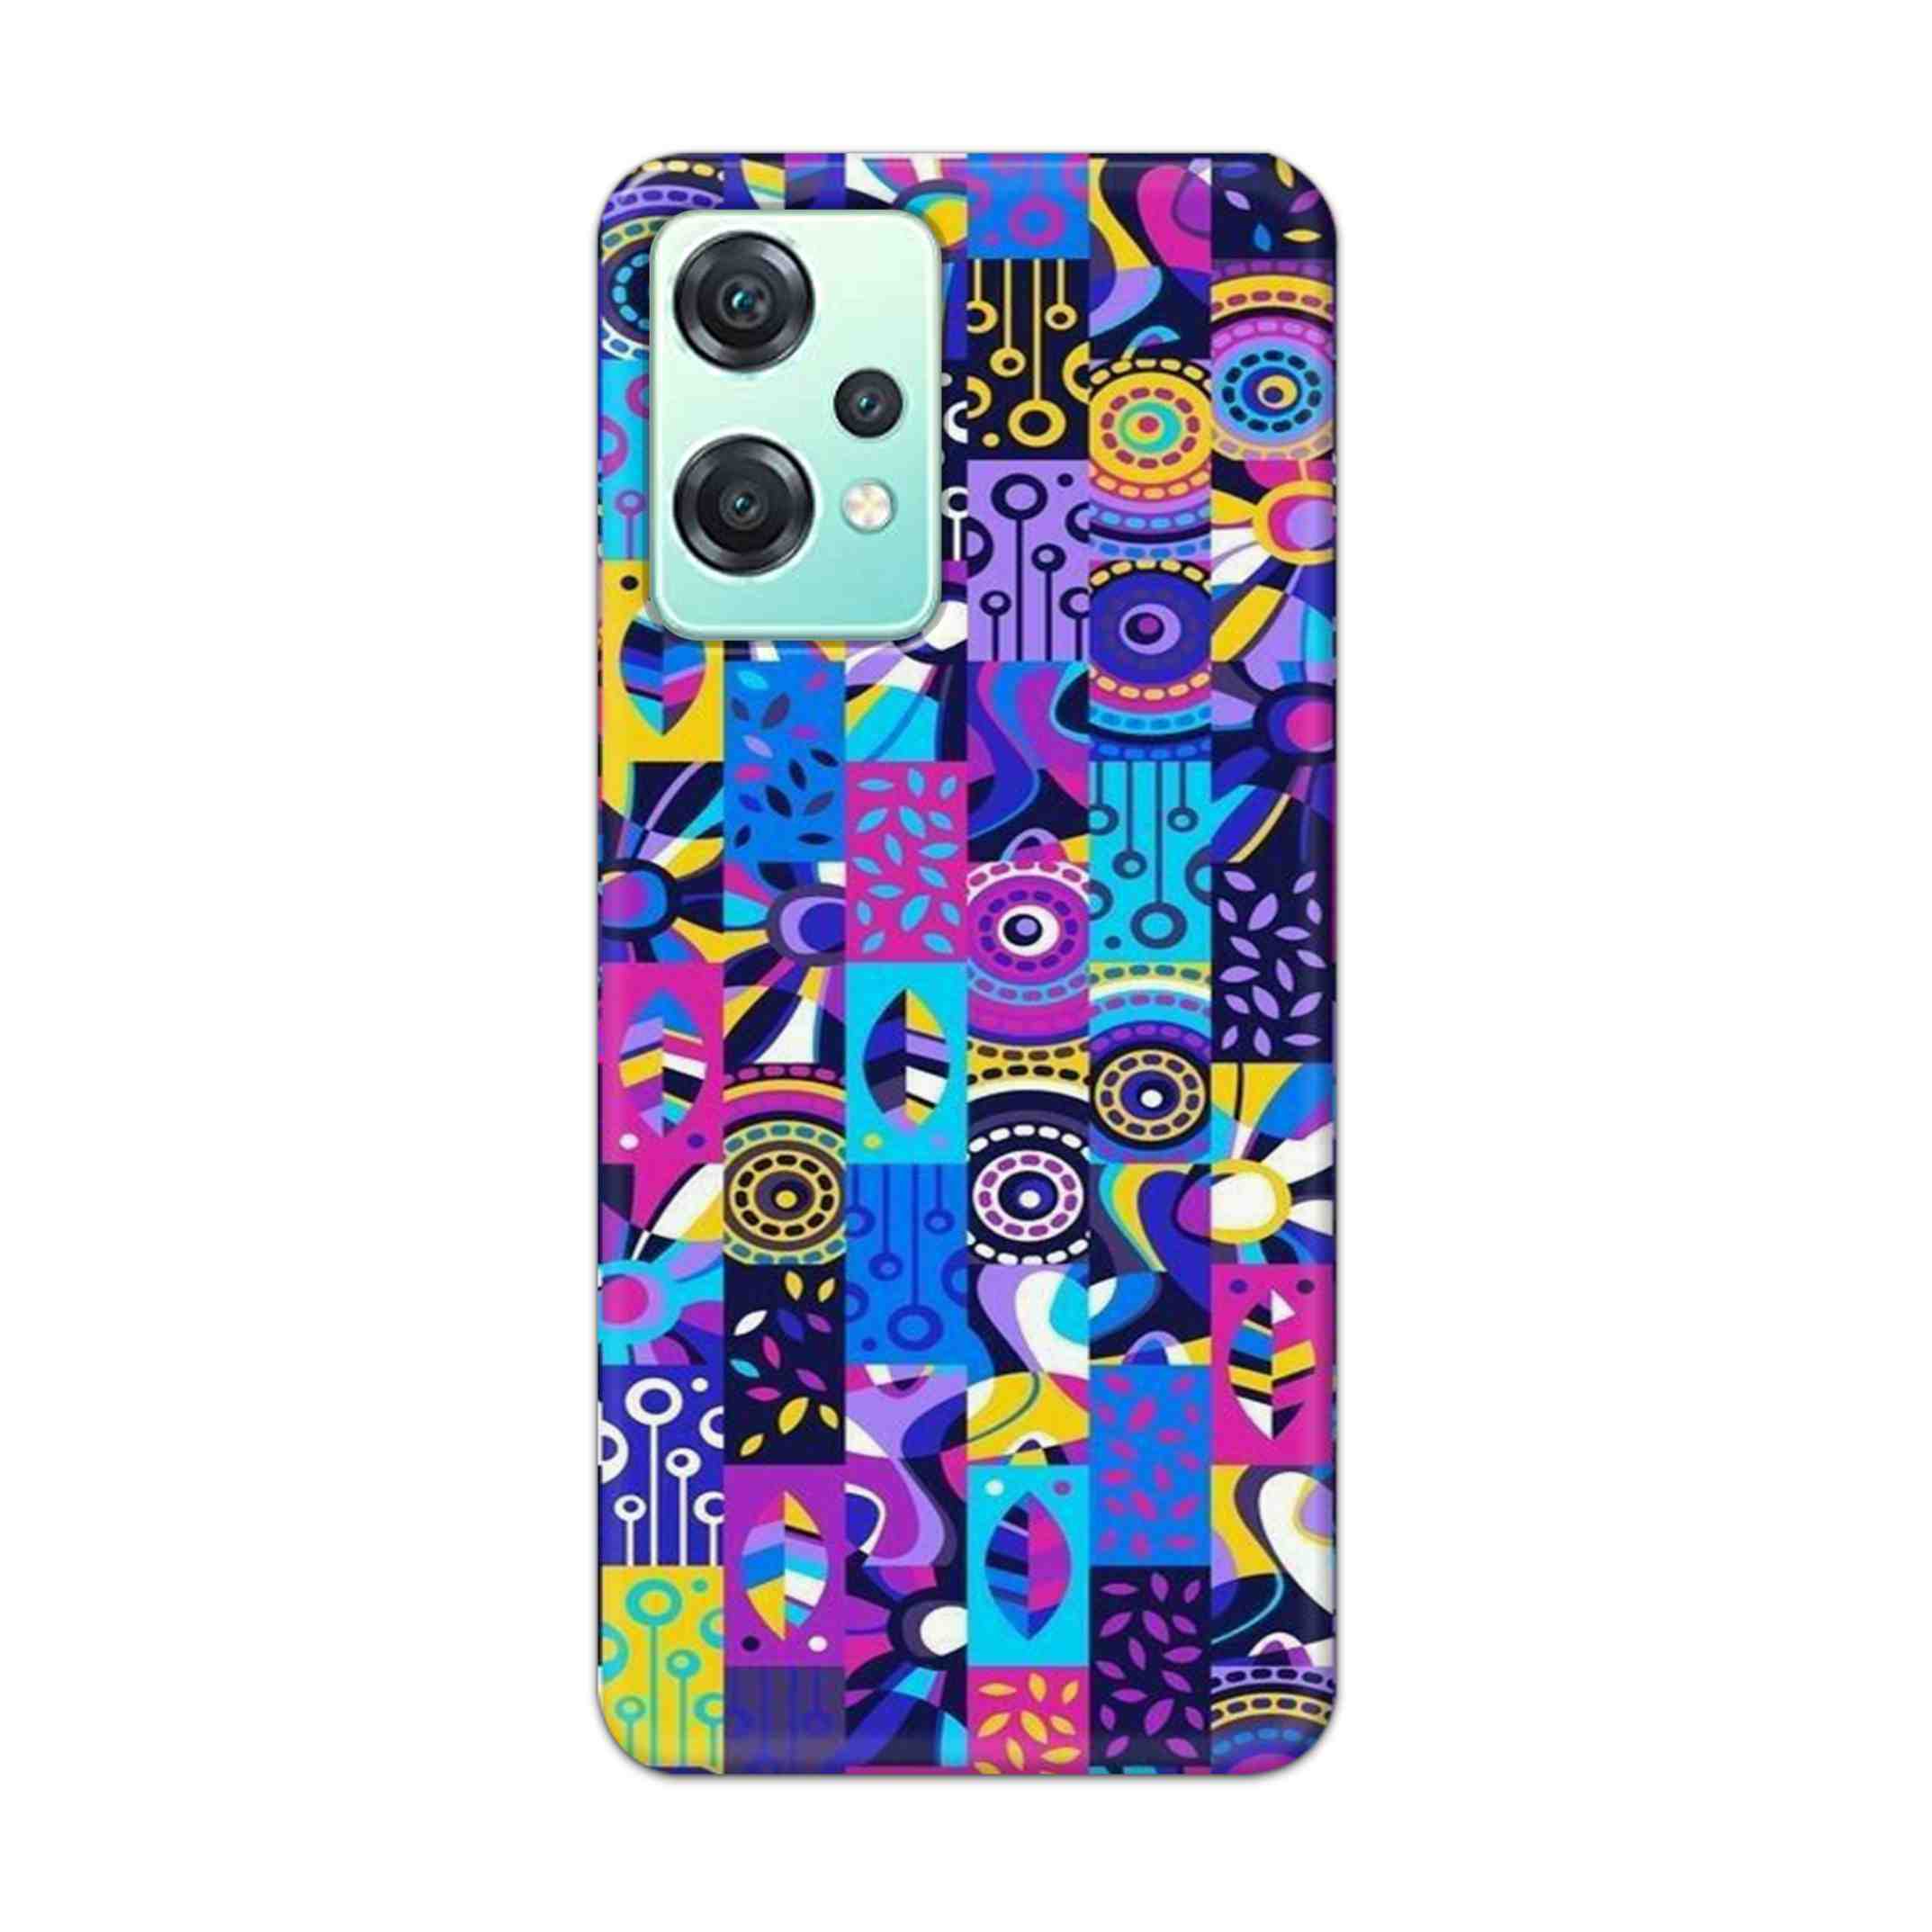 Buy Rainbow Art Hard Back Mobile Phone Case Cover For OnePlus Nord CE 2 Lite 5G Online